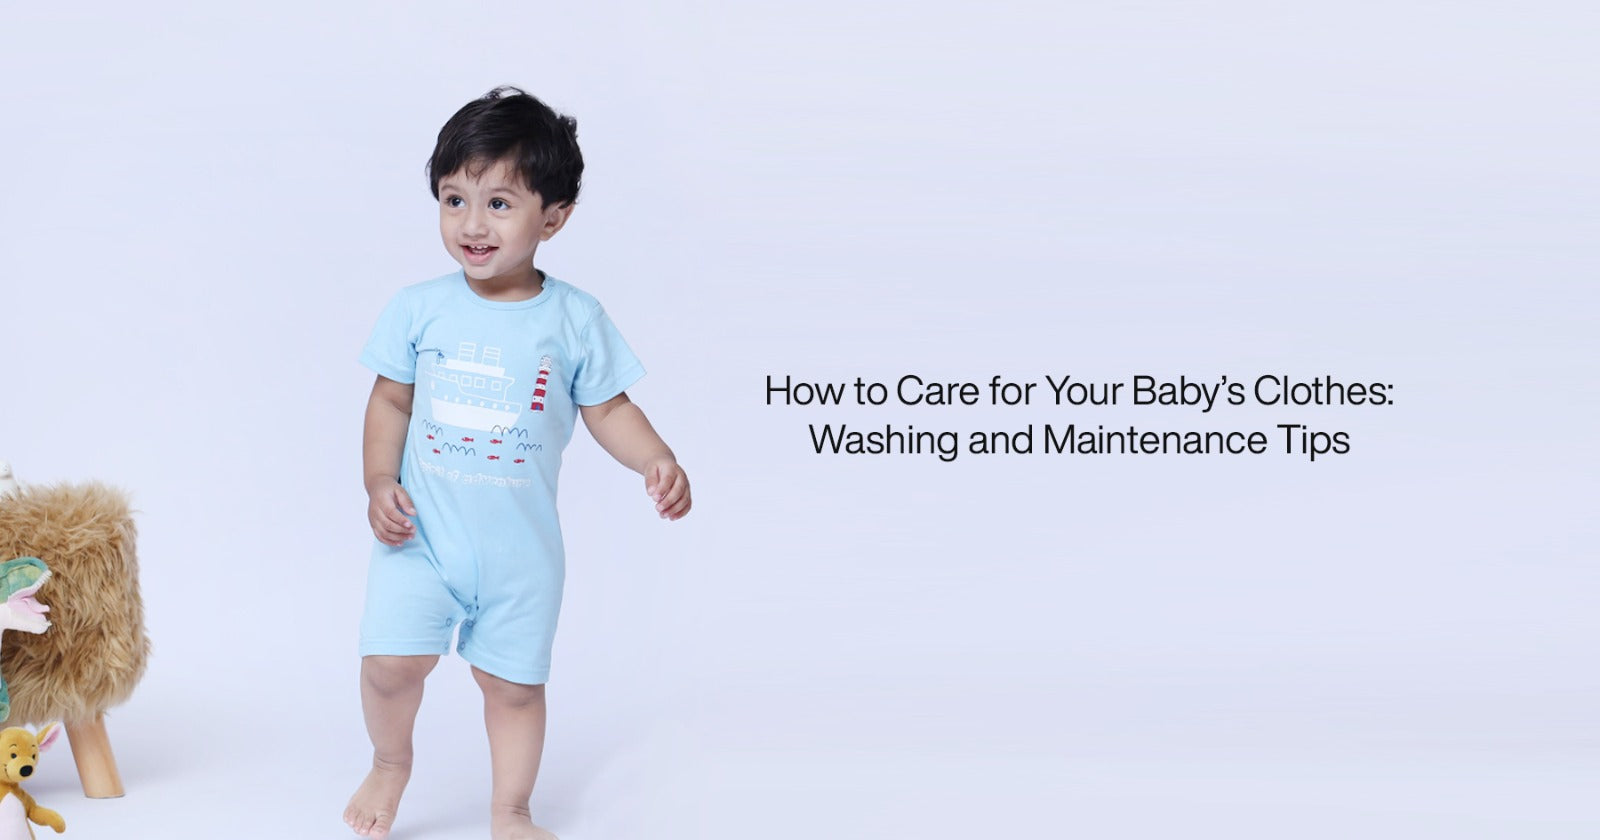 How to Care for Your Baby’s Clothes: Washing and Maintenance Tips